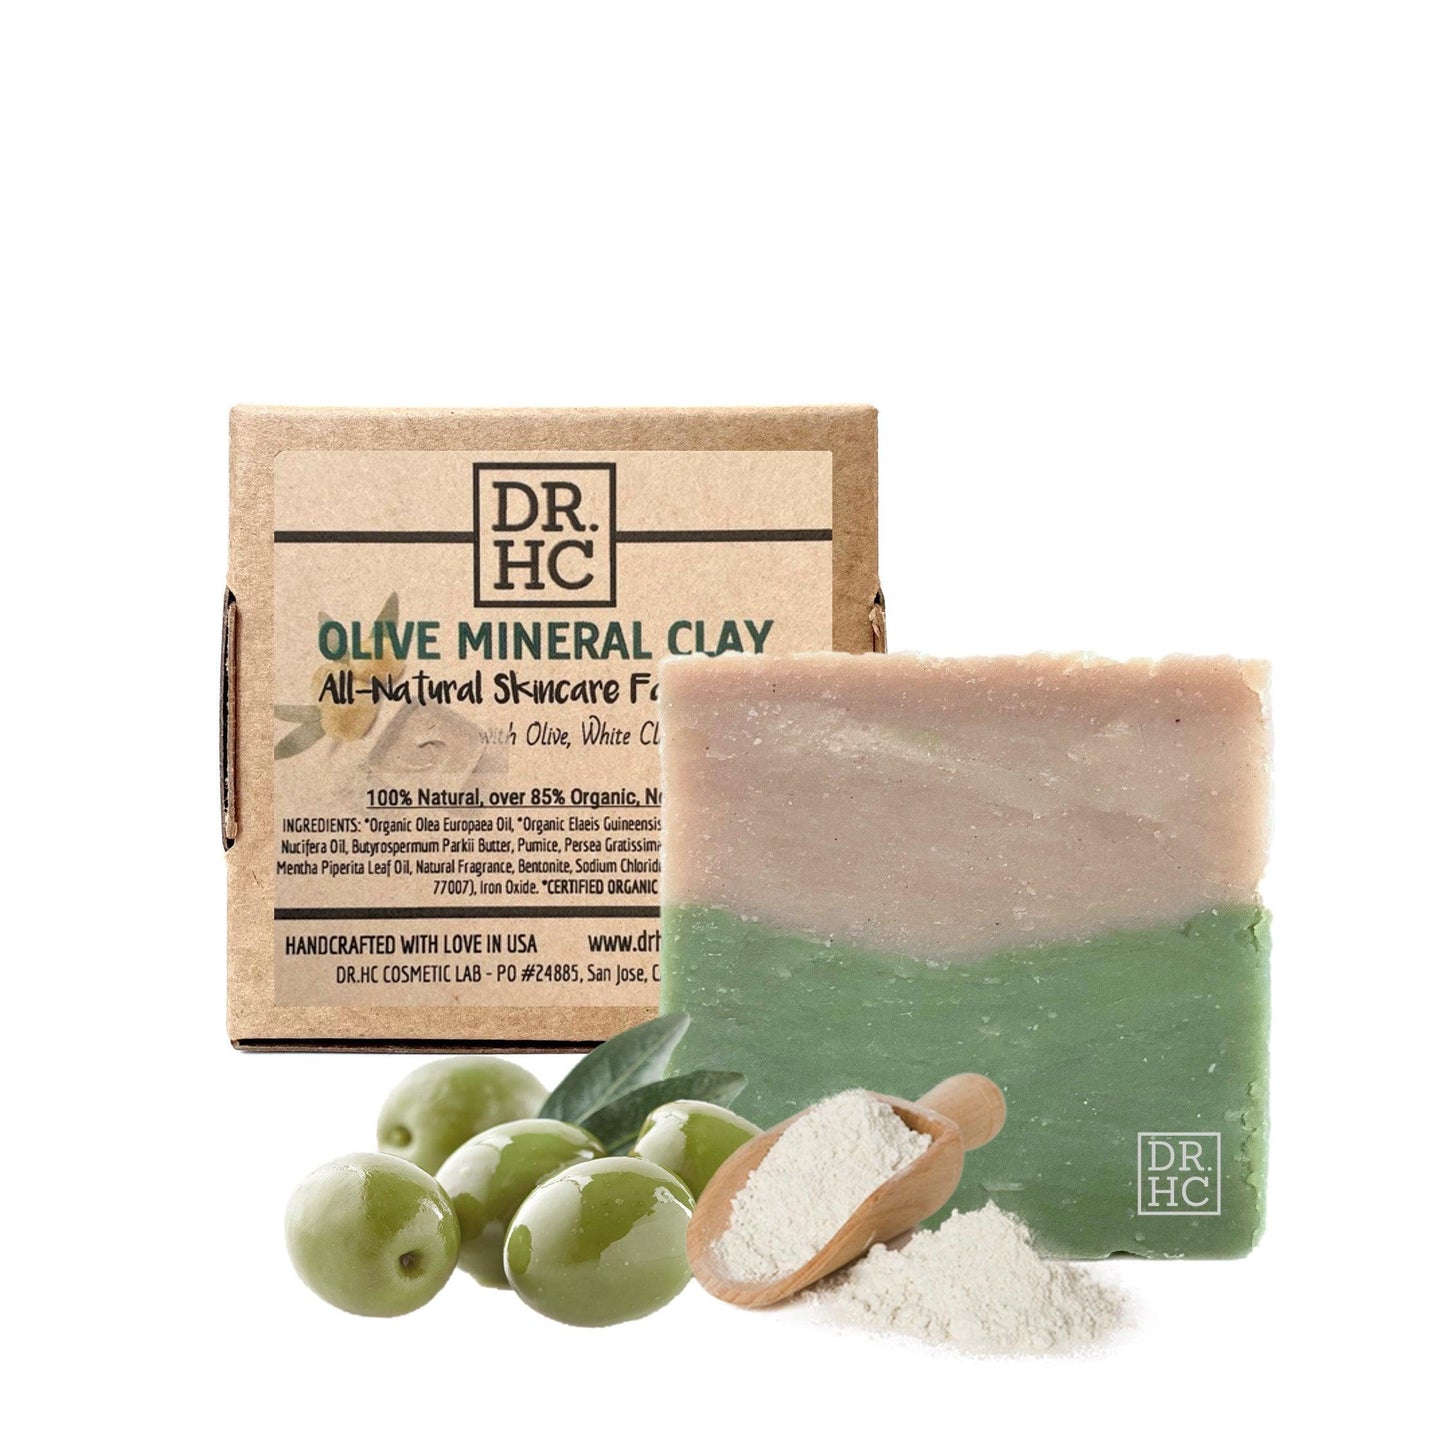 DR.HC Olive Mineral Clay All-Natural Skincare Face Soap (110g, 3.8oz) (Anti-aging, Anti-acne, Detoxifying, Pore minimizing...)